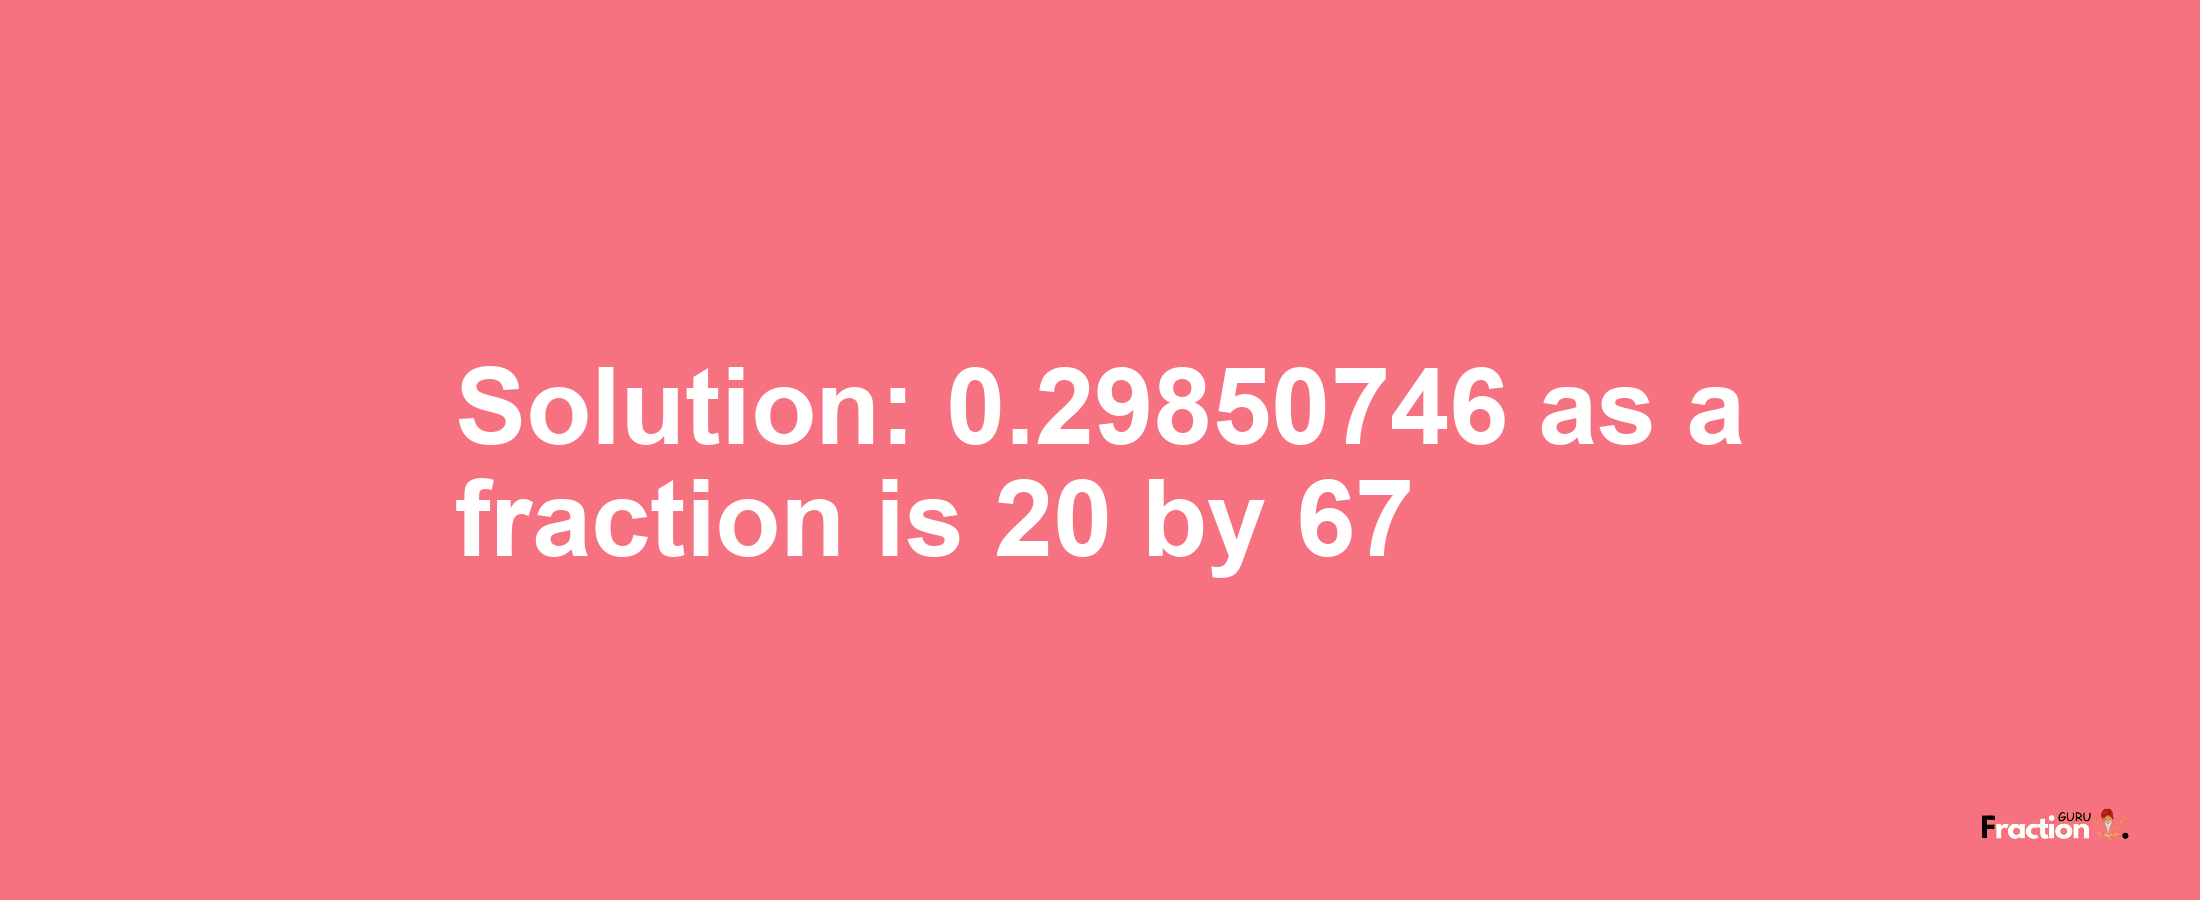 Solution:0.29850746 as a fraction is 20/67